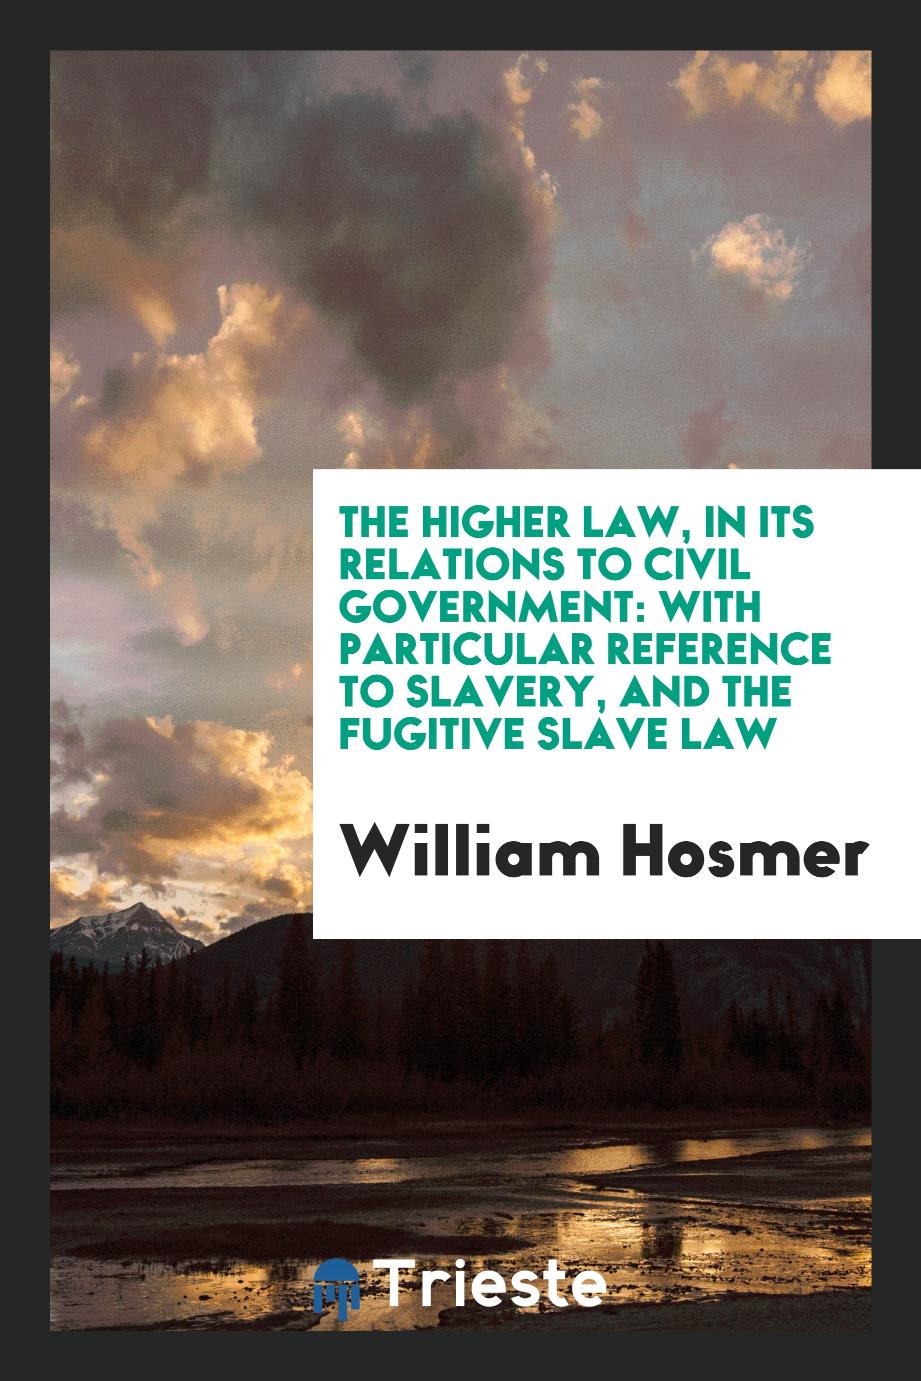 The higher law, in its relations to civil government: with particular reference to slavery, and the Fugitive slave law